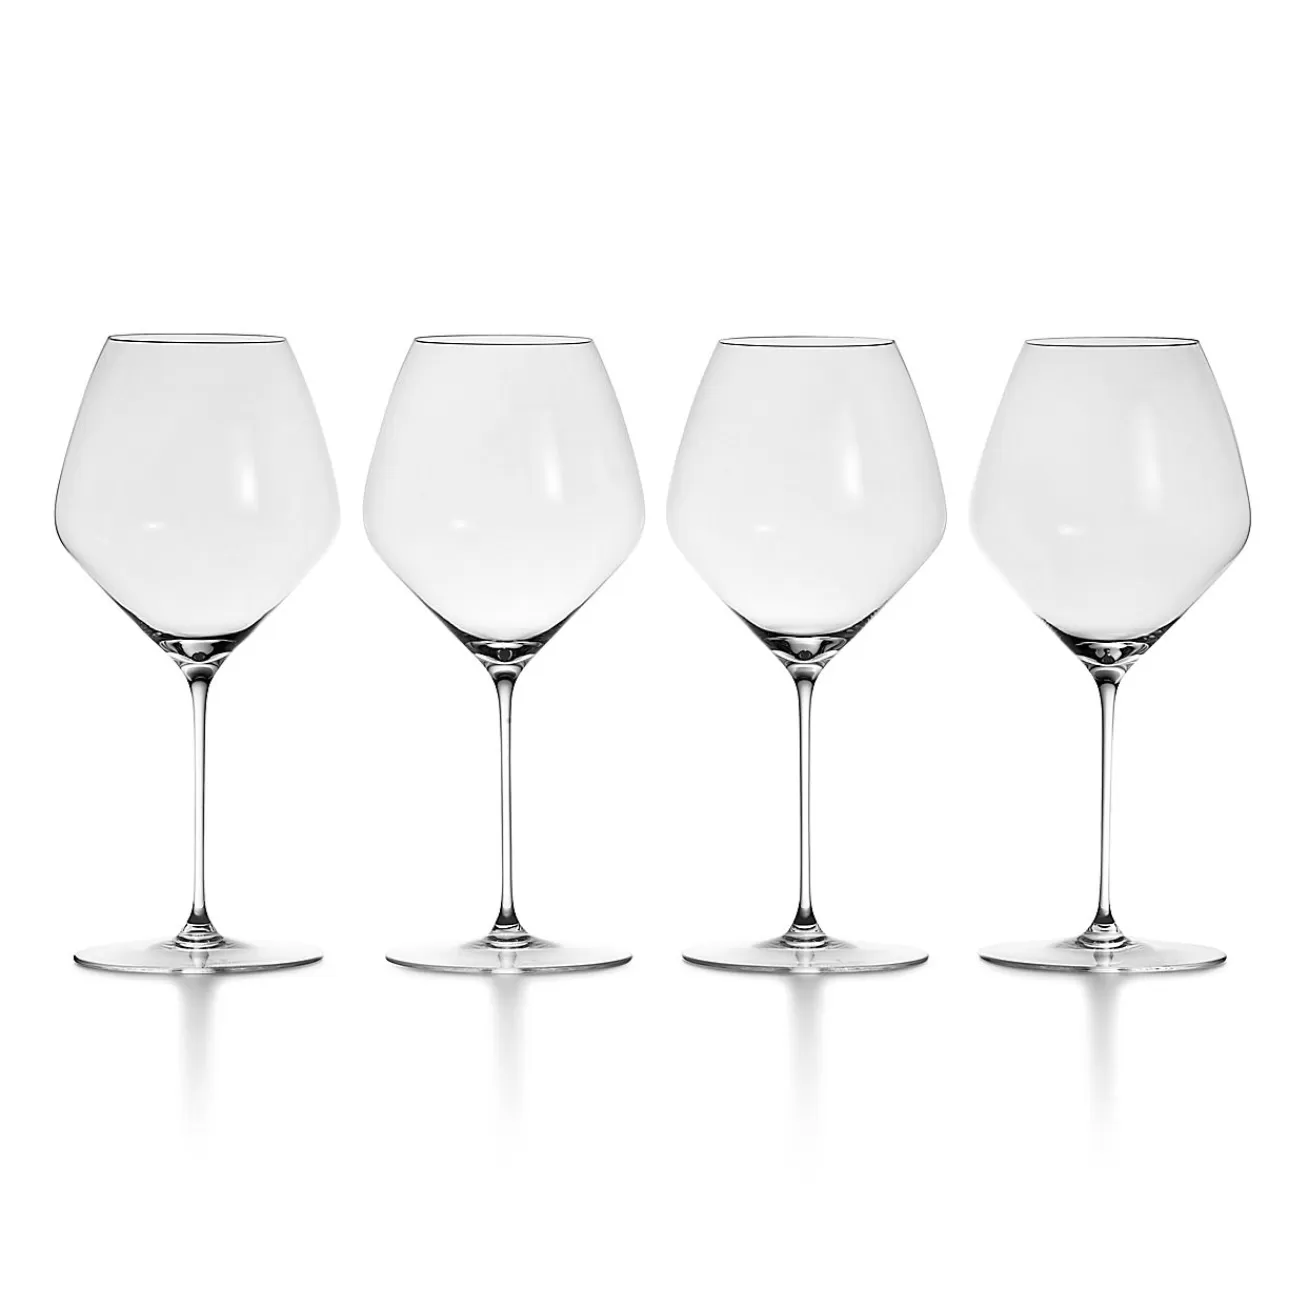 Tiffany & Co. Tiffany Connoisseur Pinot Noir Wine Glass in Crystal Glass, Set of Four | ^ The Home | Housewarming Gifts